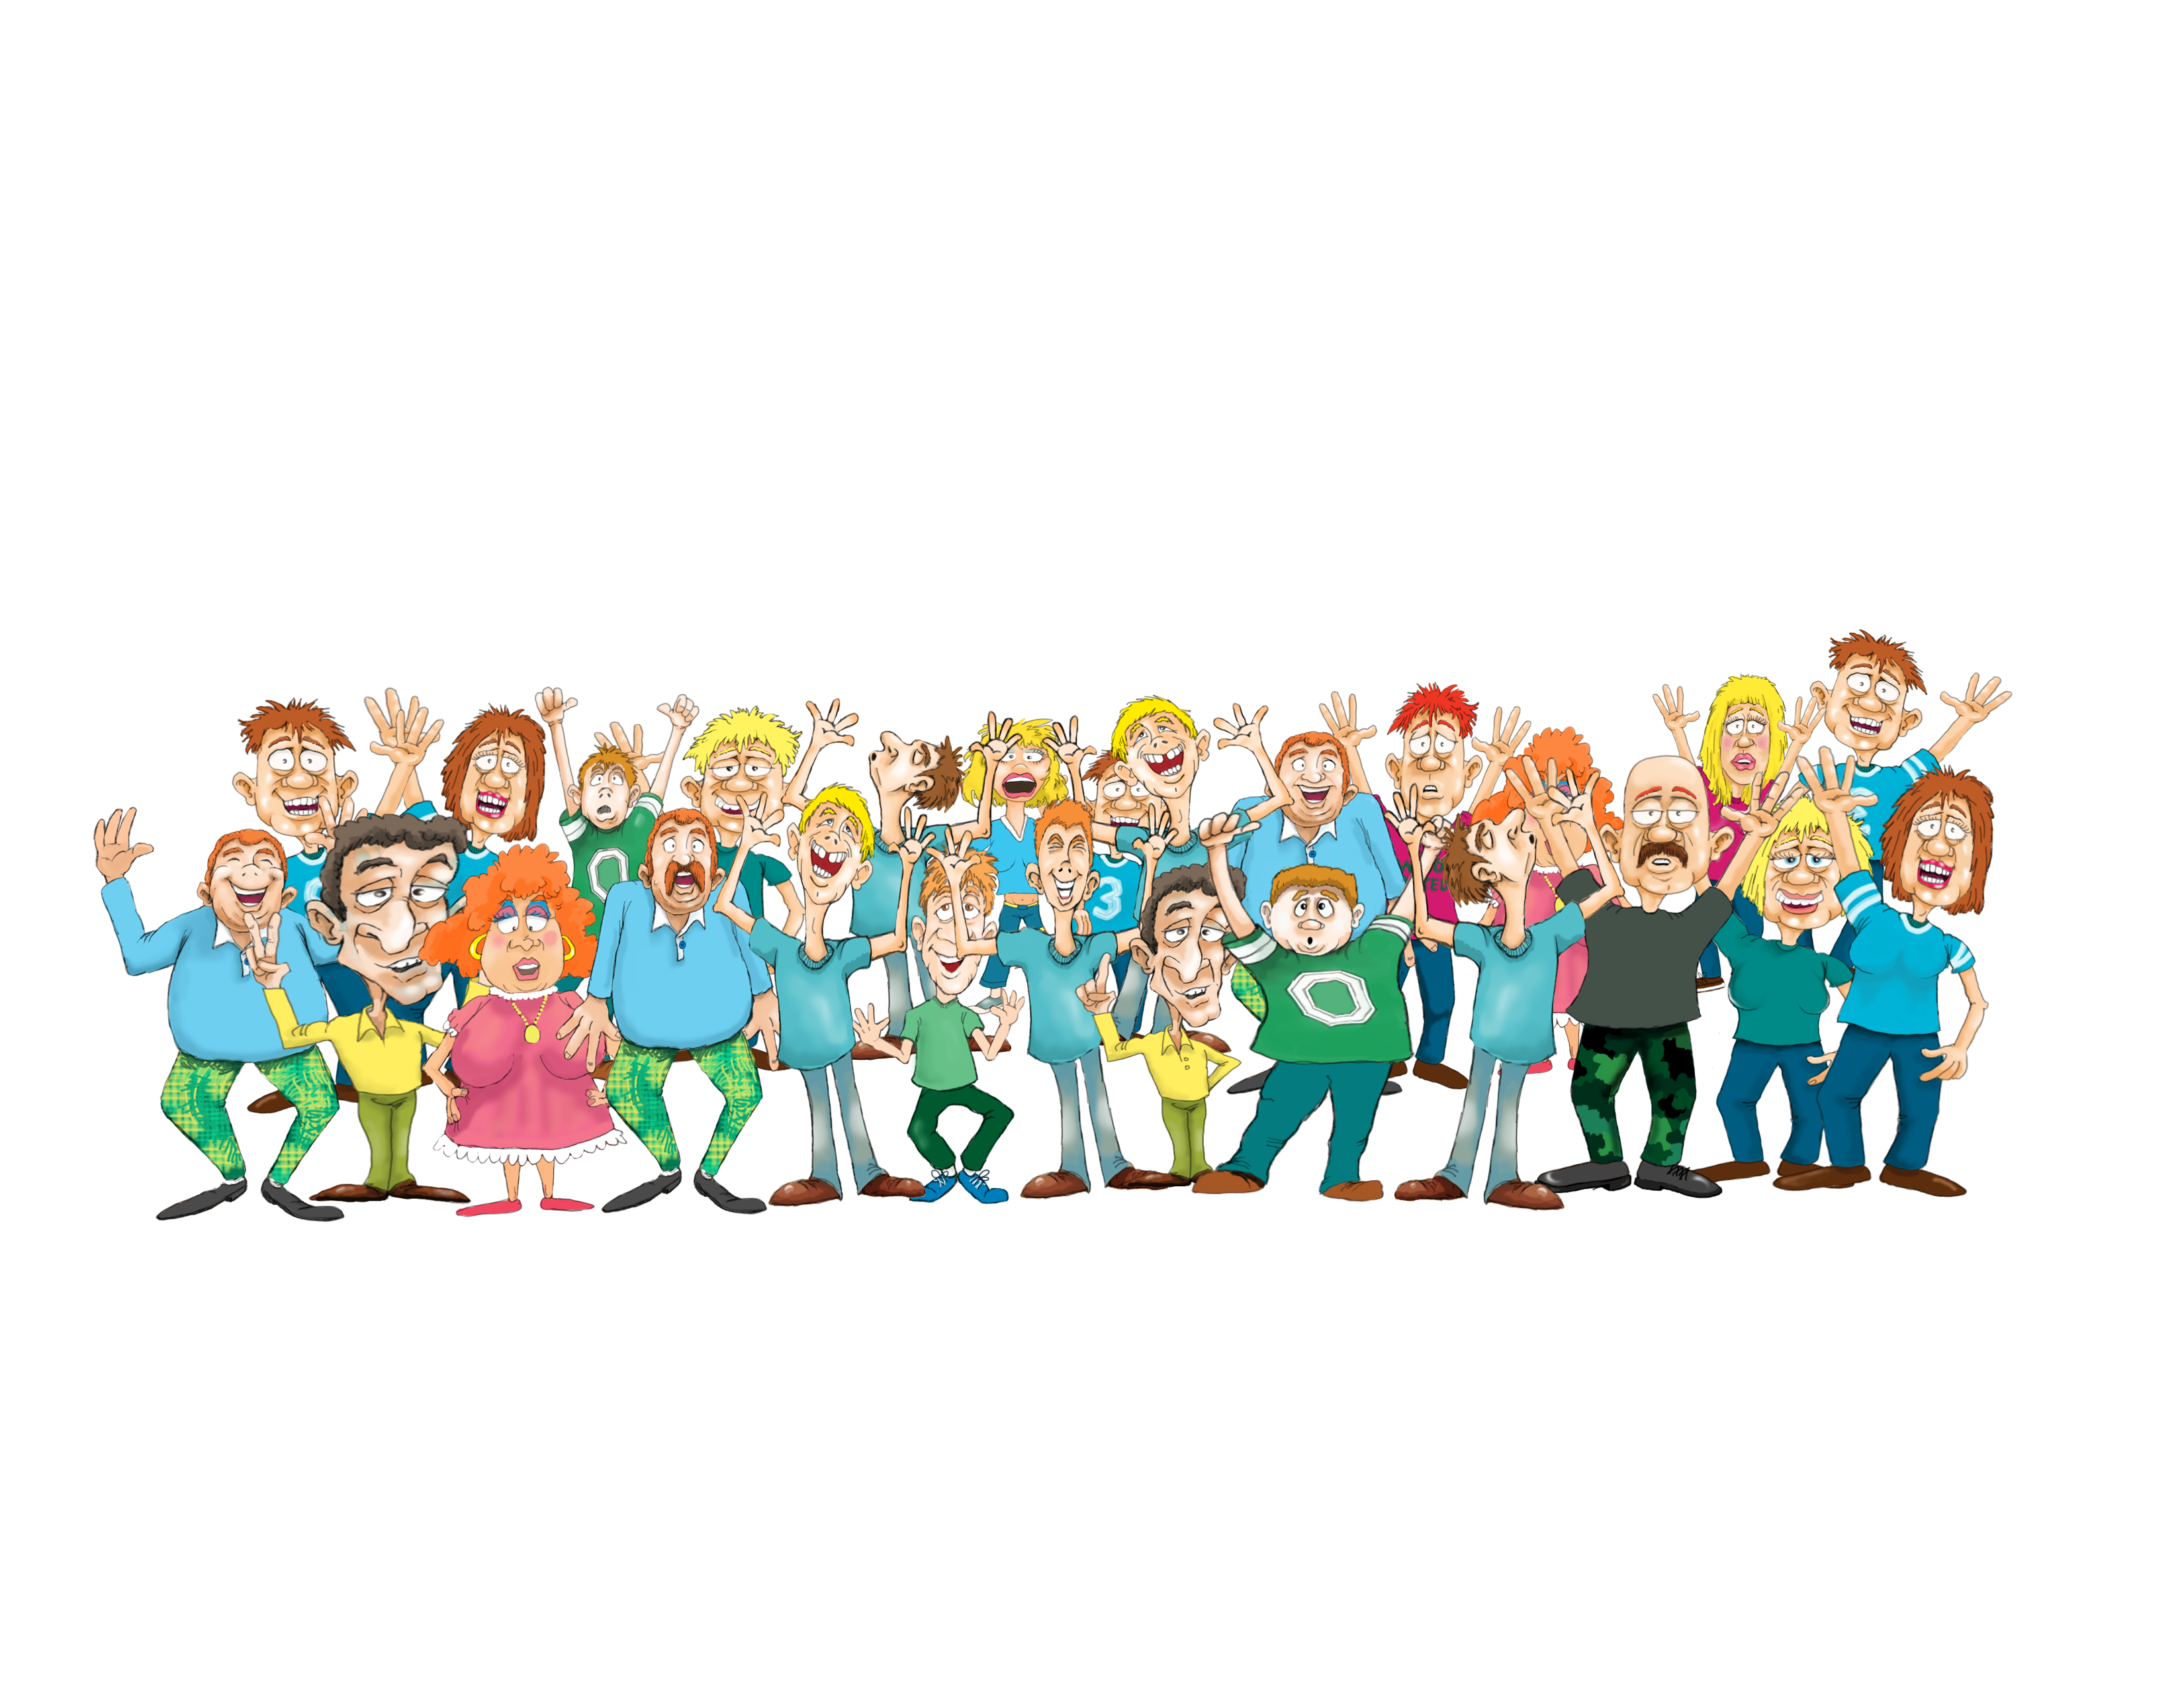 Crowd clipart free download on WebStockReview